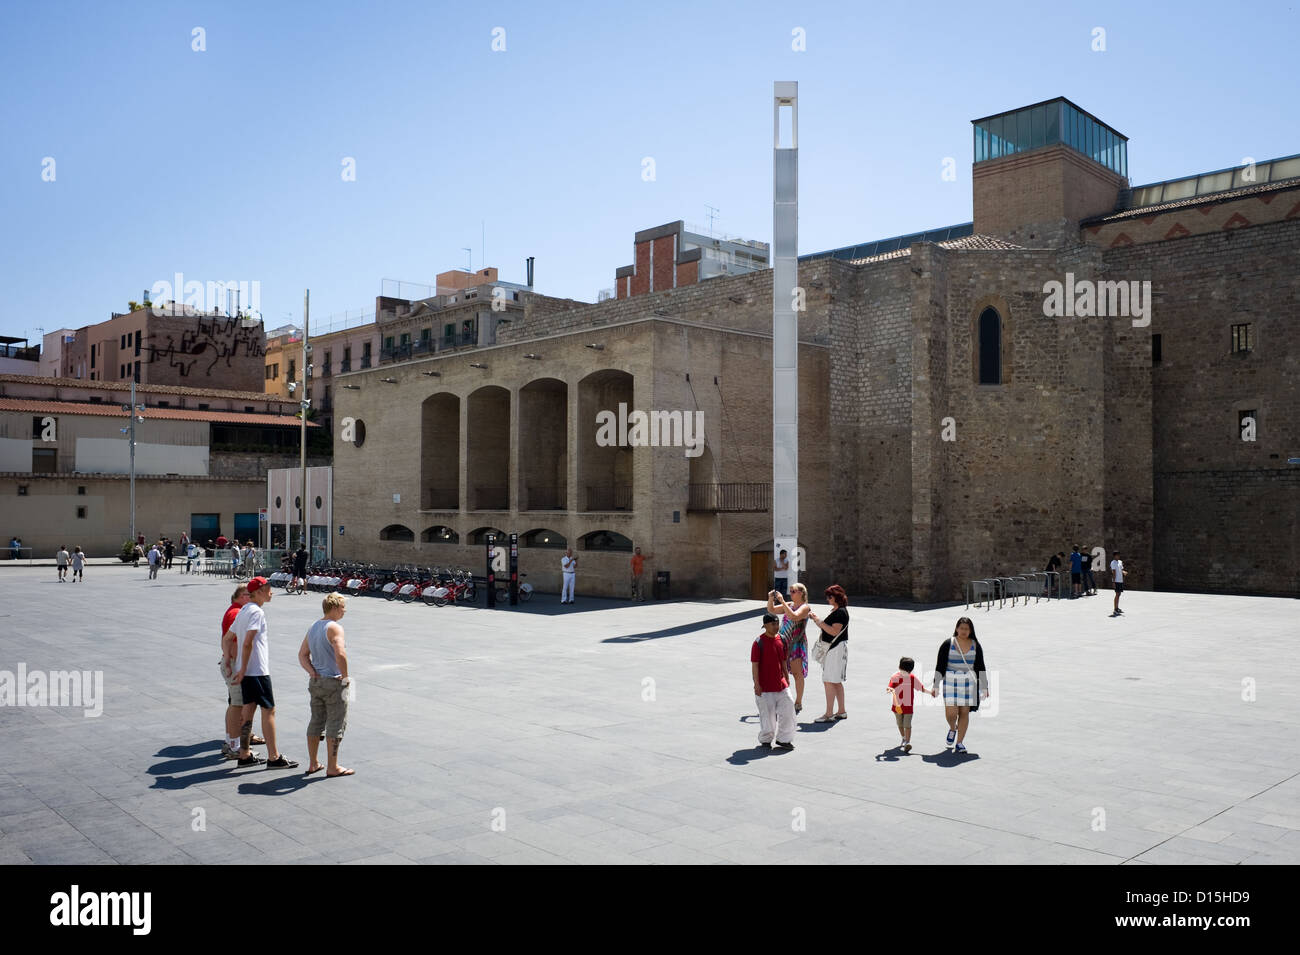 Barcelona, Spain: Tourists enjoying sightseeing in Plaça dels Angles in Barcelona Downtown in a brilliant sunny day Stock Photo